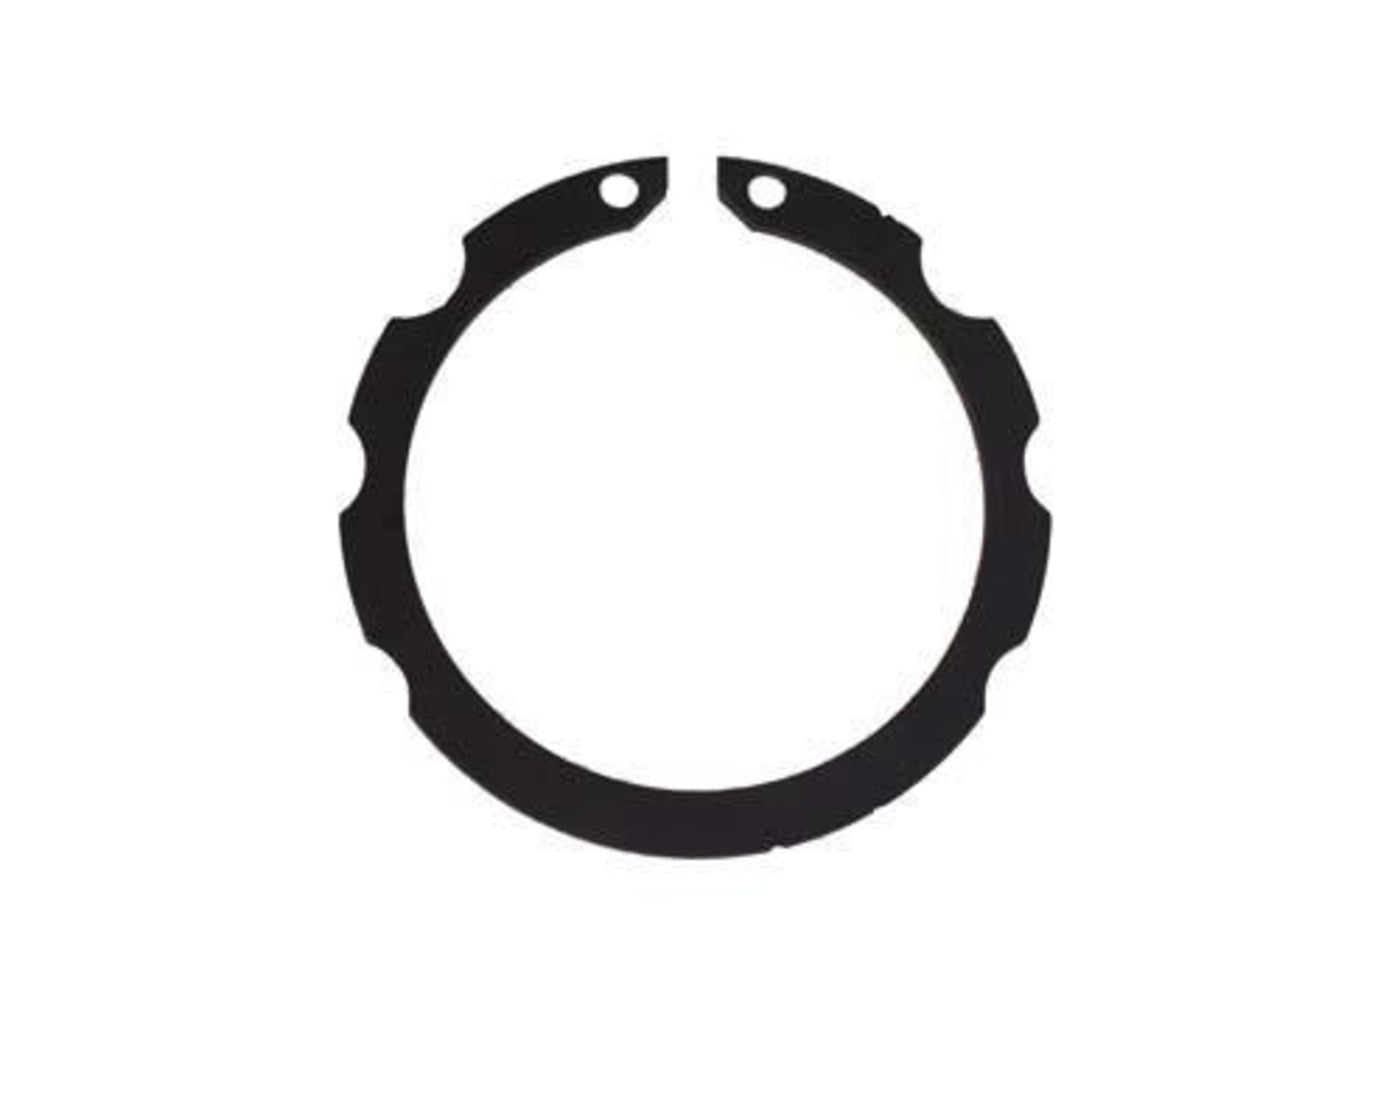 E-Z-GO RXV Driven Clutch Retaining Ring (Years 2008-Up)